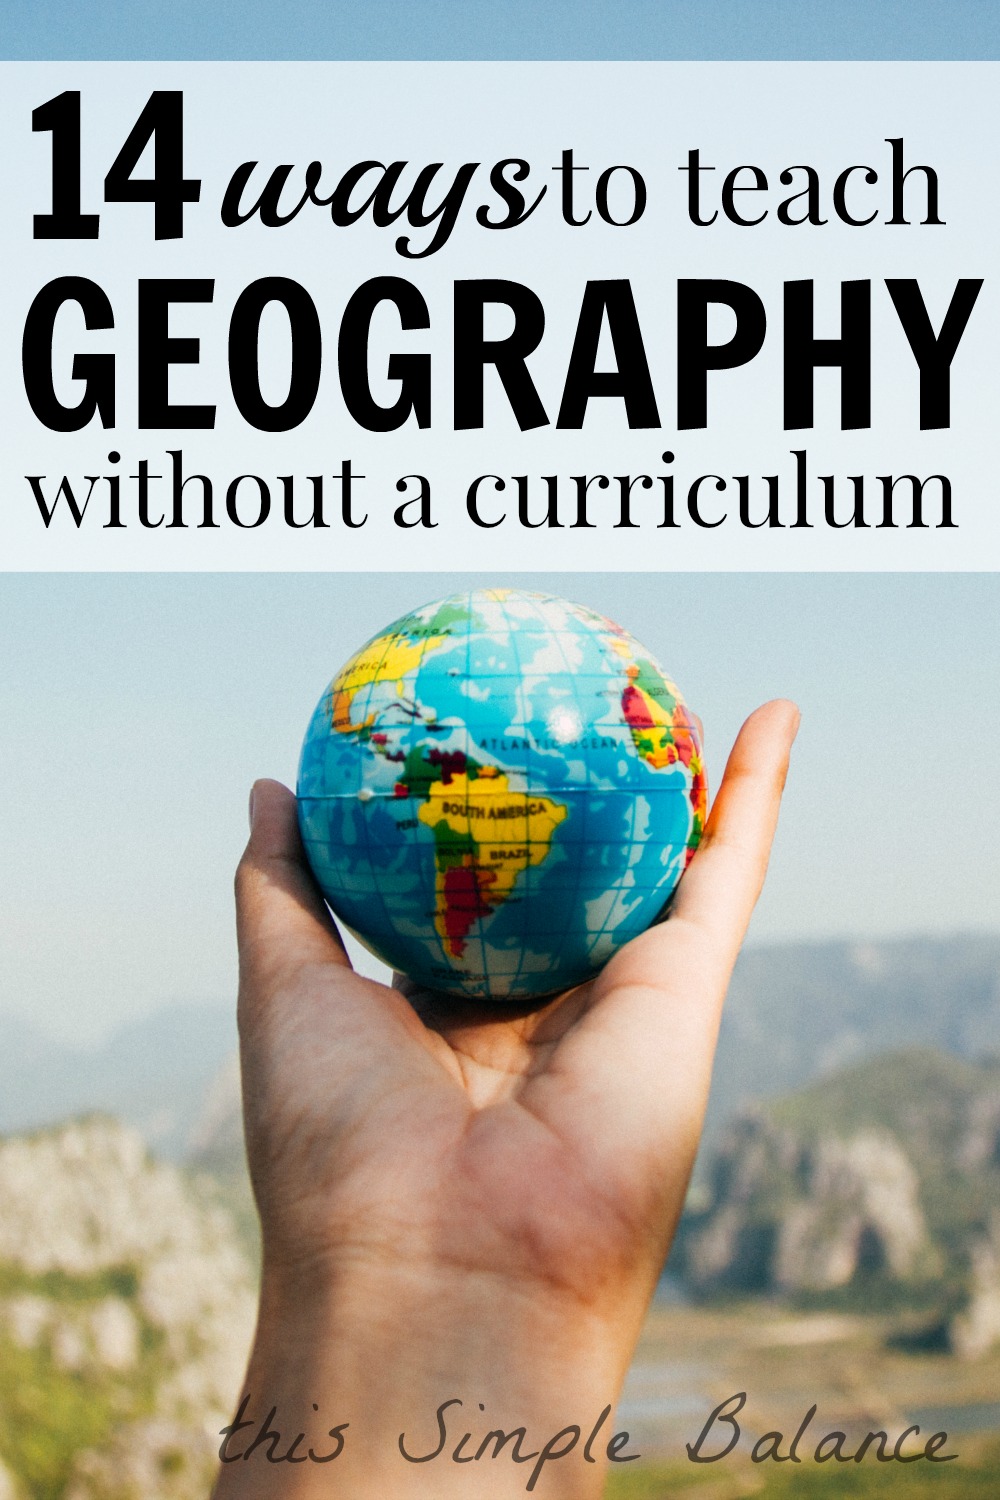 close-up of hand holding tiny globe, with text overlay "14 ways to teach geography without a curriculum"